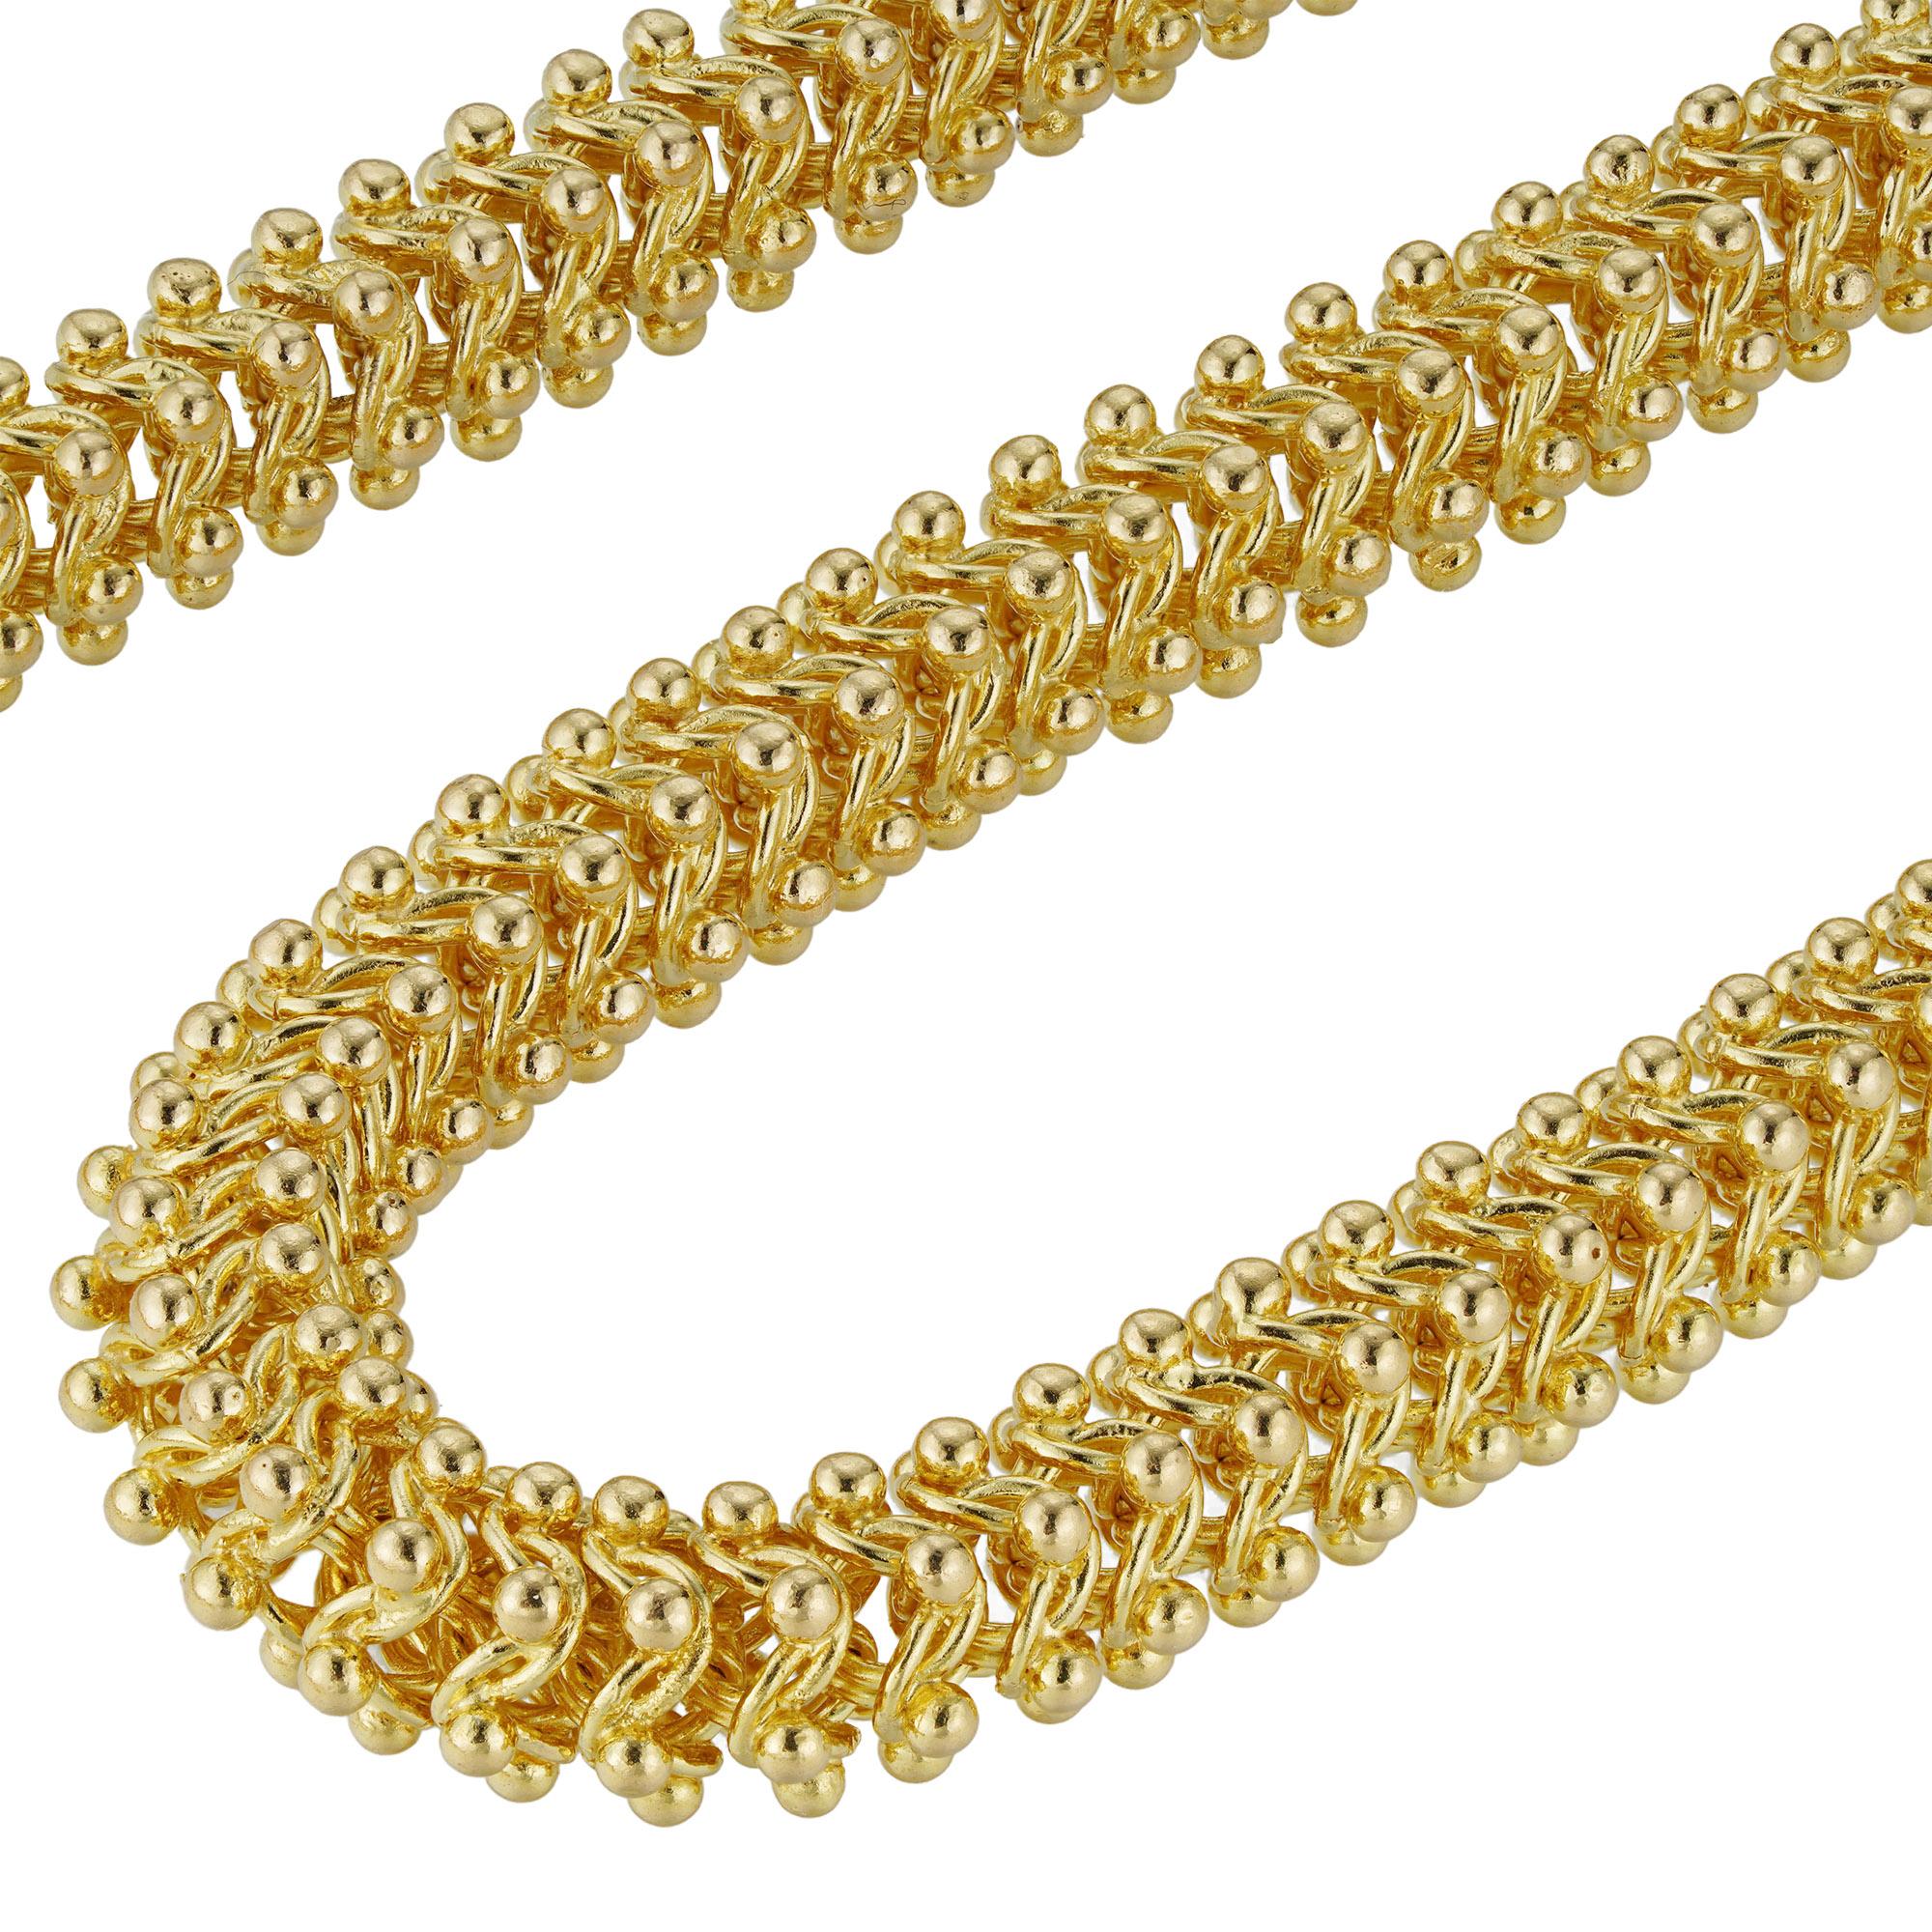 A handmade Scheherazade chain necklace & bracelet suite, by Lucie Heskett-Brem the Gold Weaver of Lucerne, consisting of interlocking links made in yellow gold, with hidden clasps, hallmarked 18ct gold London, the necklace measuring 46 x 0.6cm, the